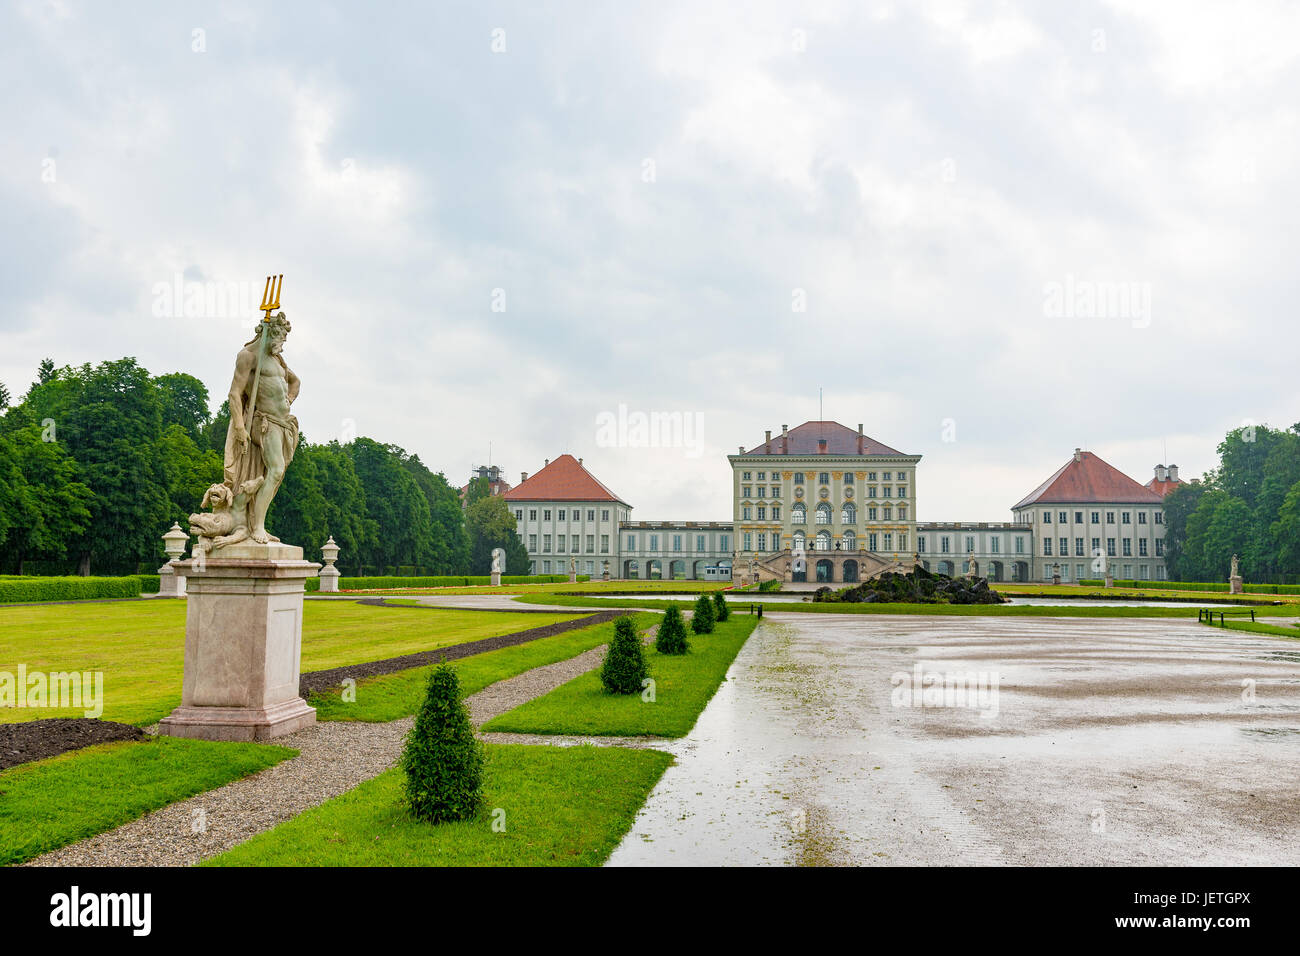 Munich, Germany - June 8. 2016: Statue Pluto by Dominik Auliczek. And the rear view of the Nymphenburg Palace. Munich, Bavaria, Germany Stock Photo